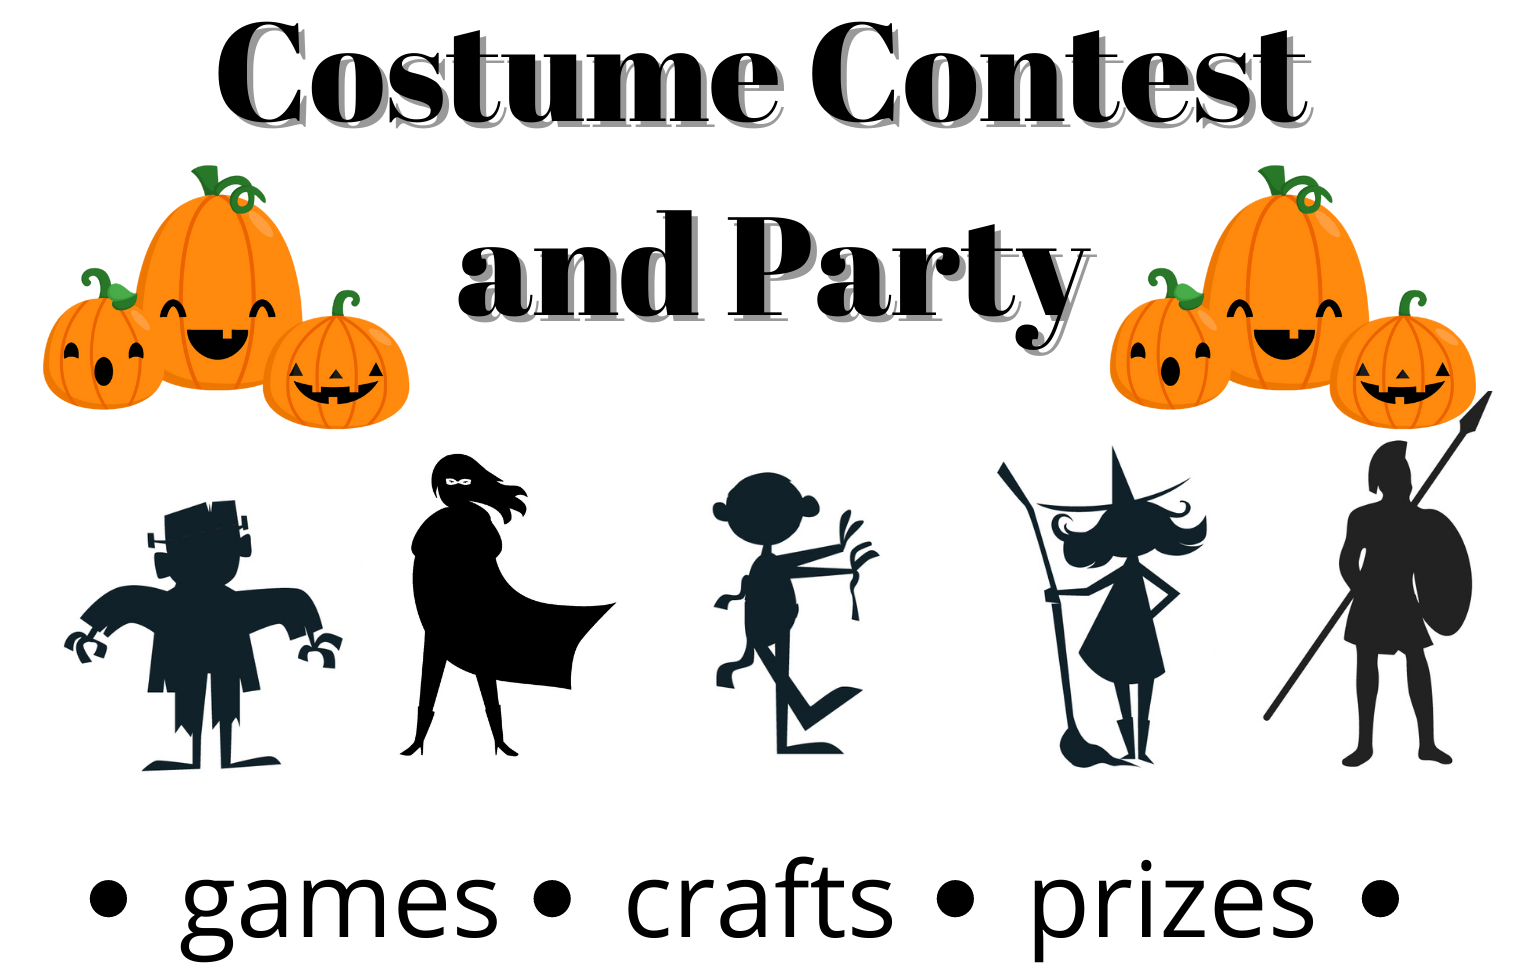 costume contest and party image